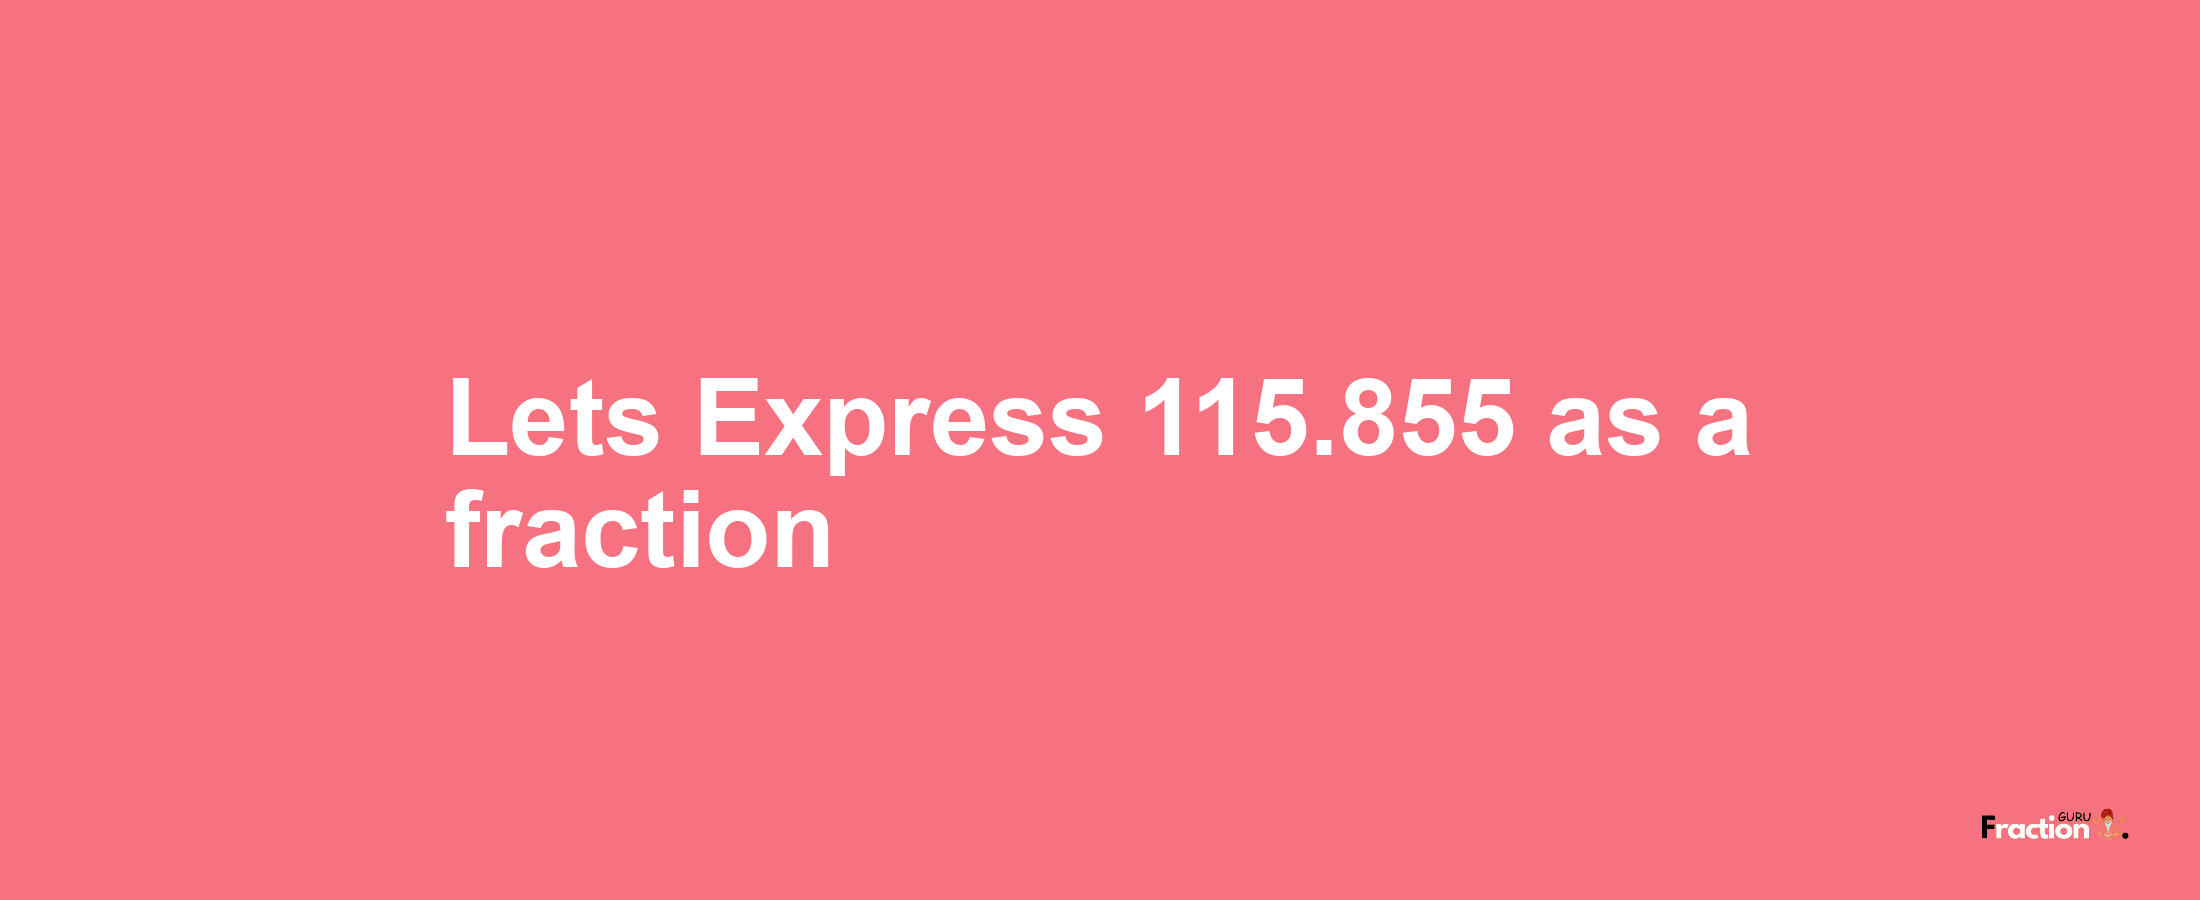 Lets Express 115.855 as afraction